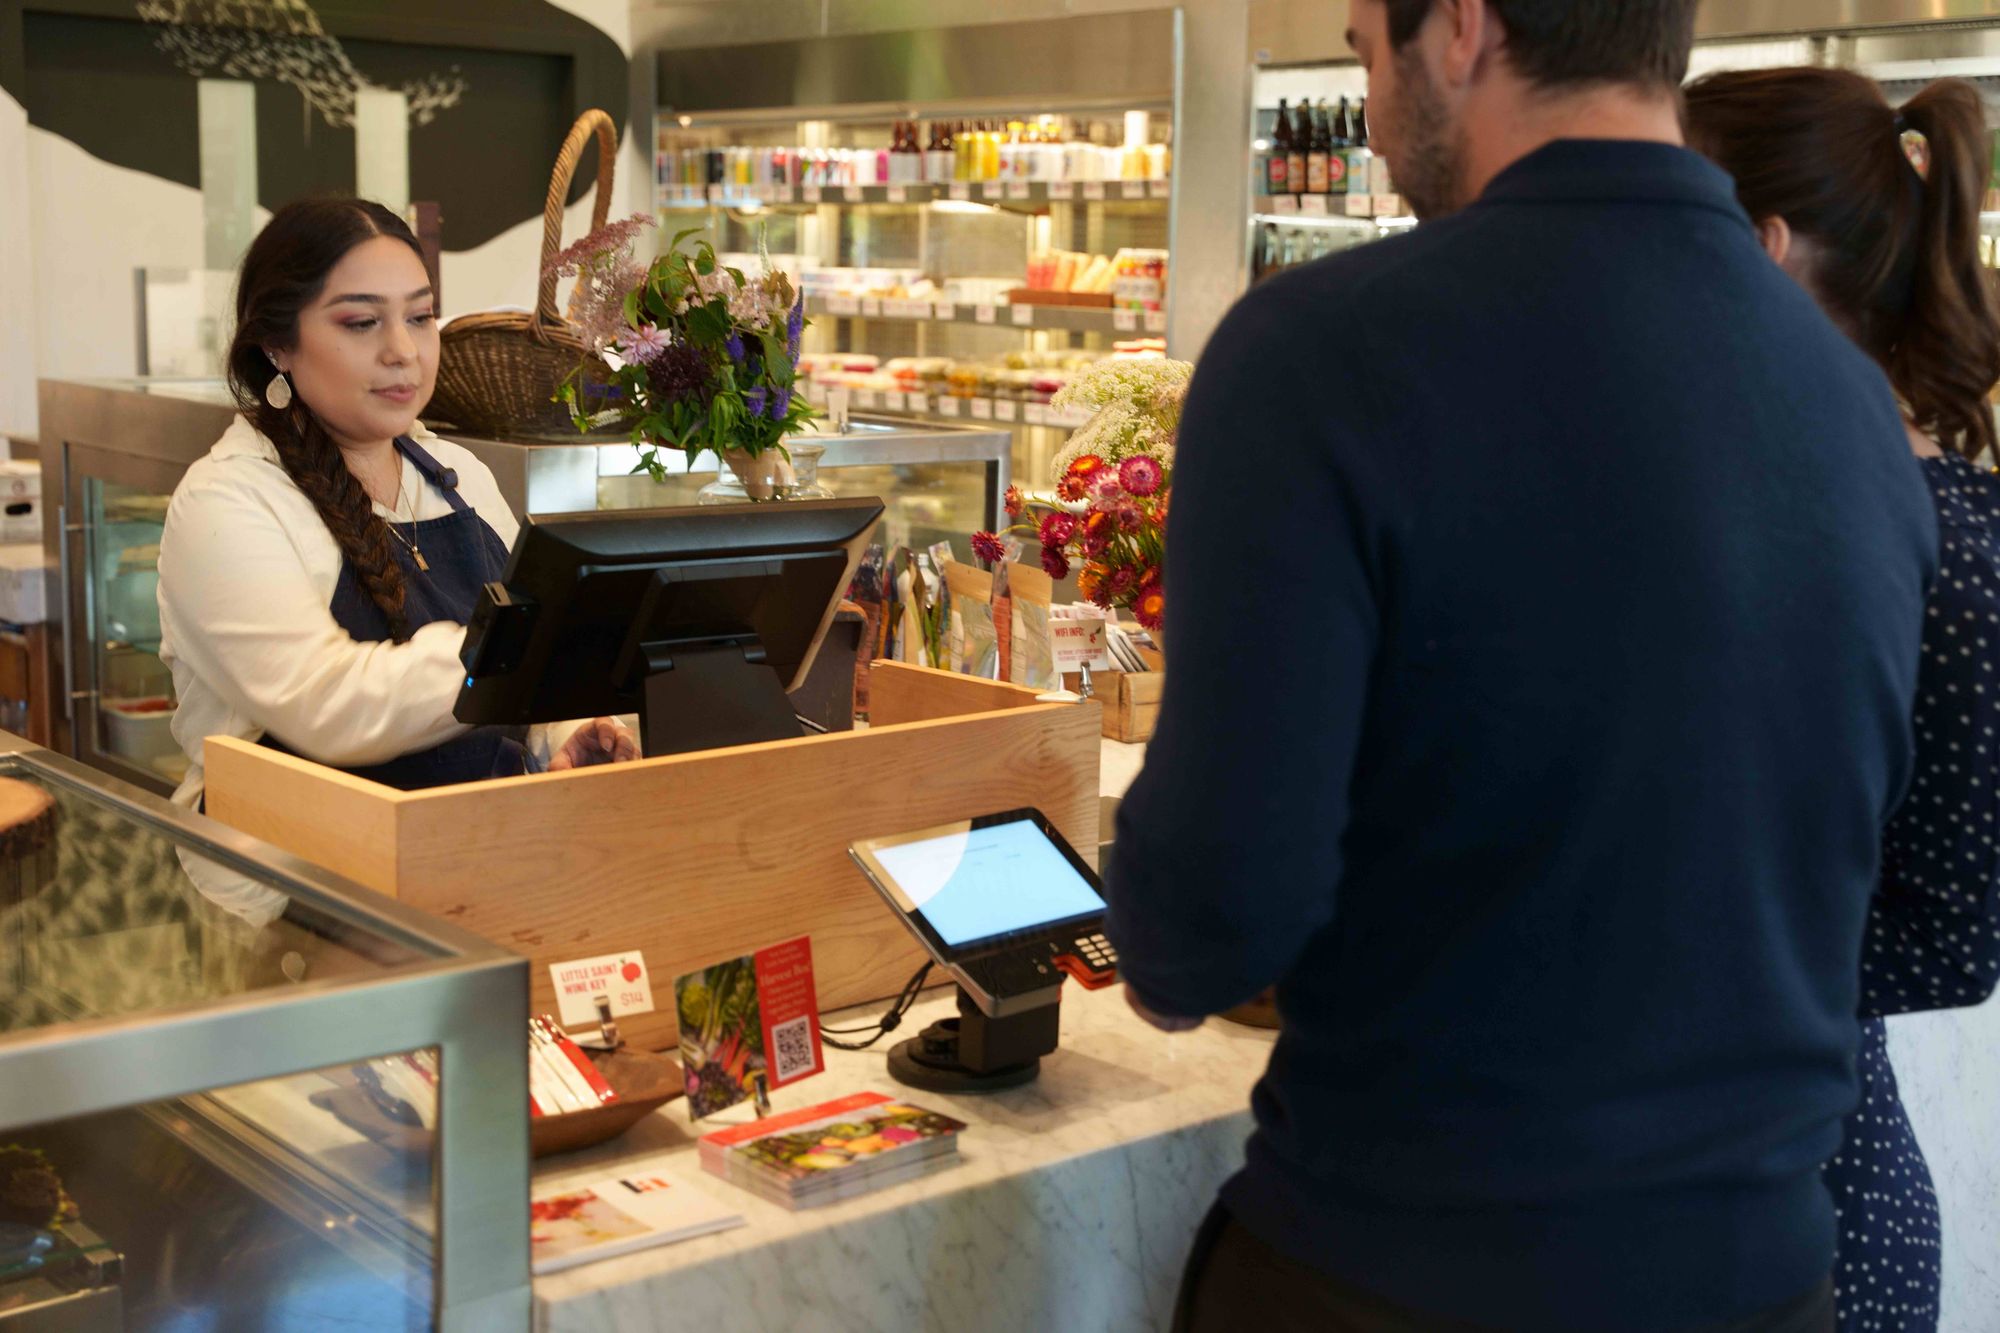 Restaurant staff ringing up guests at a poit-of-sale station.